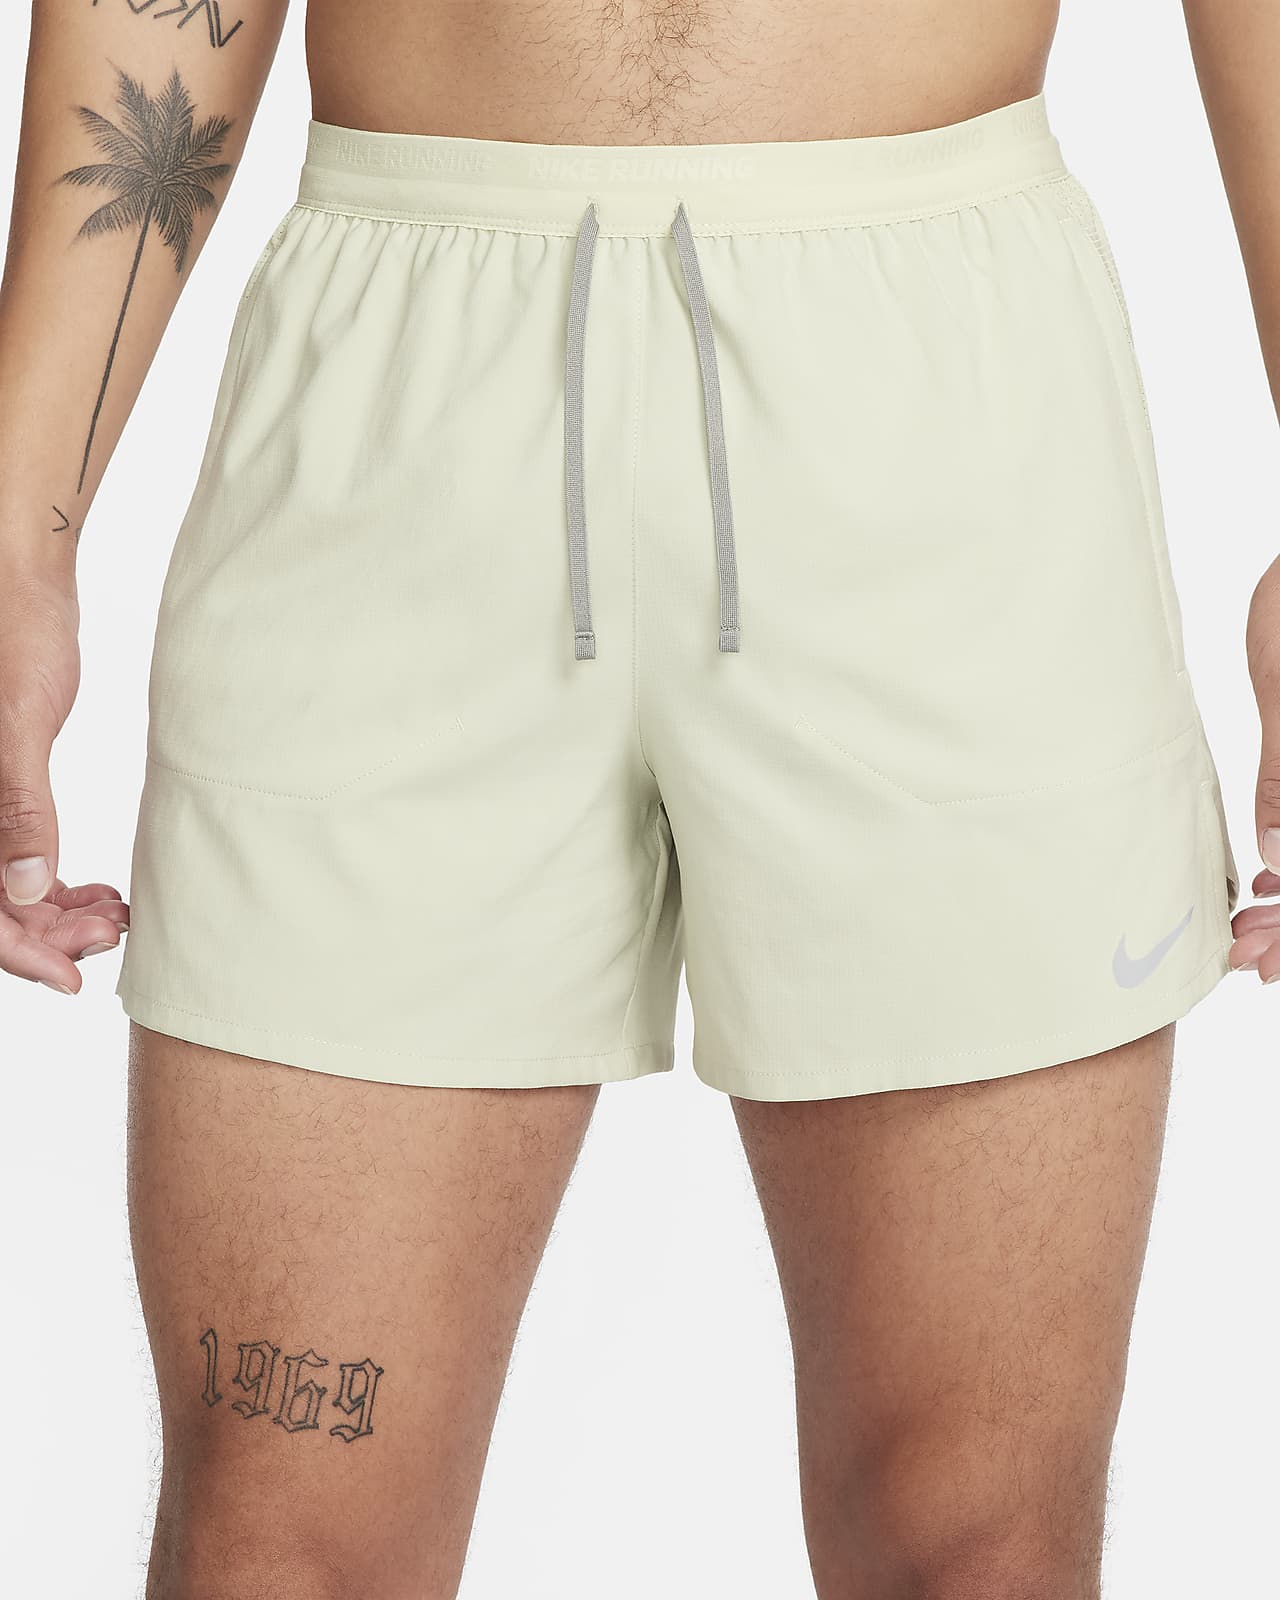 Nike Dri-FIT Run Division Stride Men's 4 Brief-Lined Running Shorts.